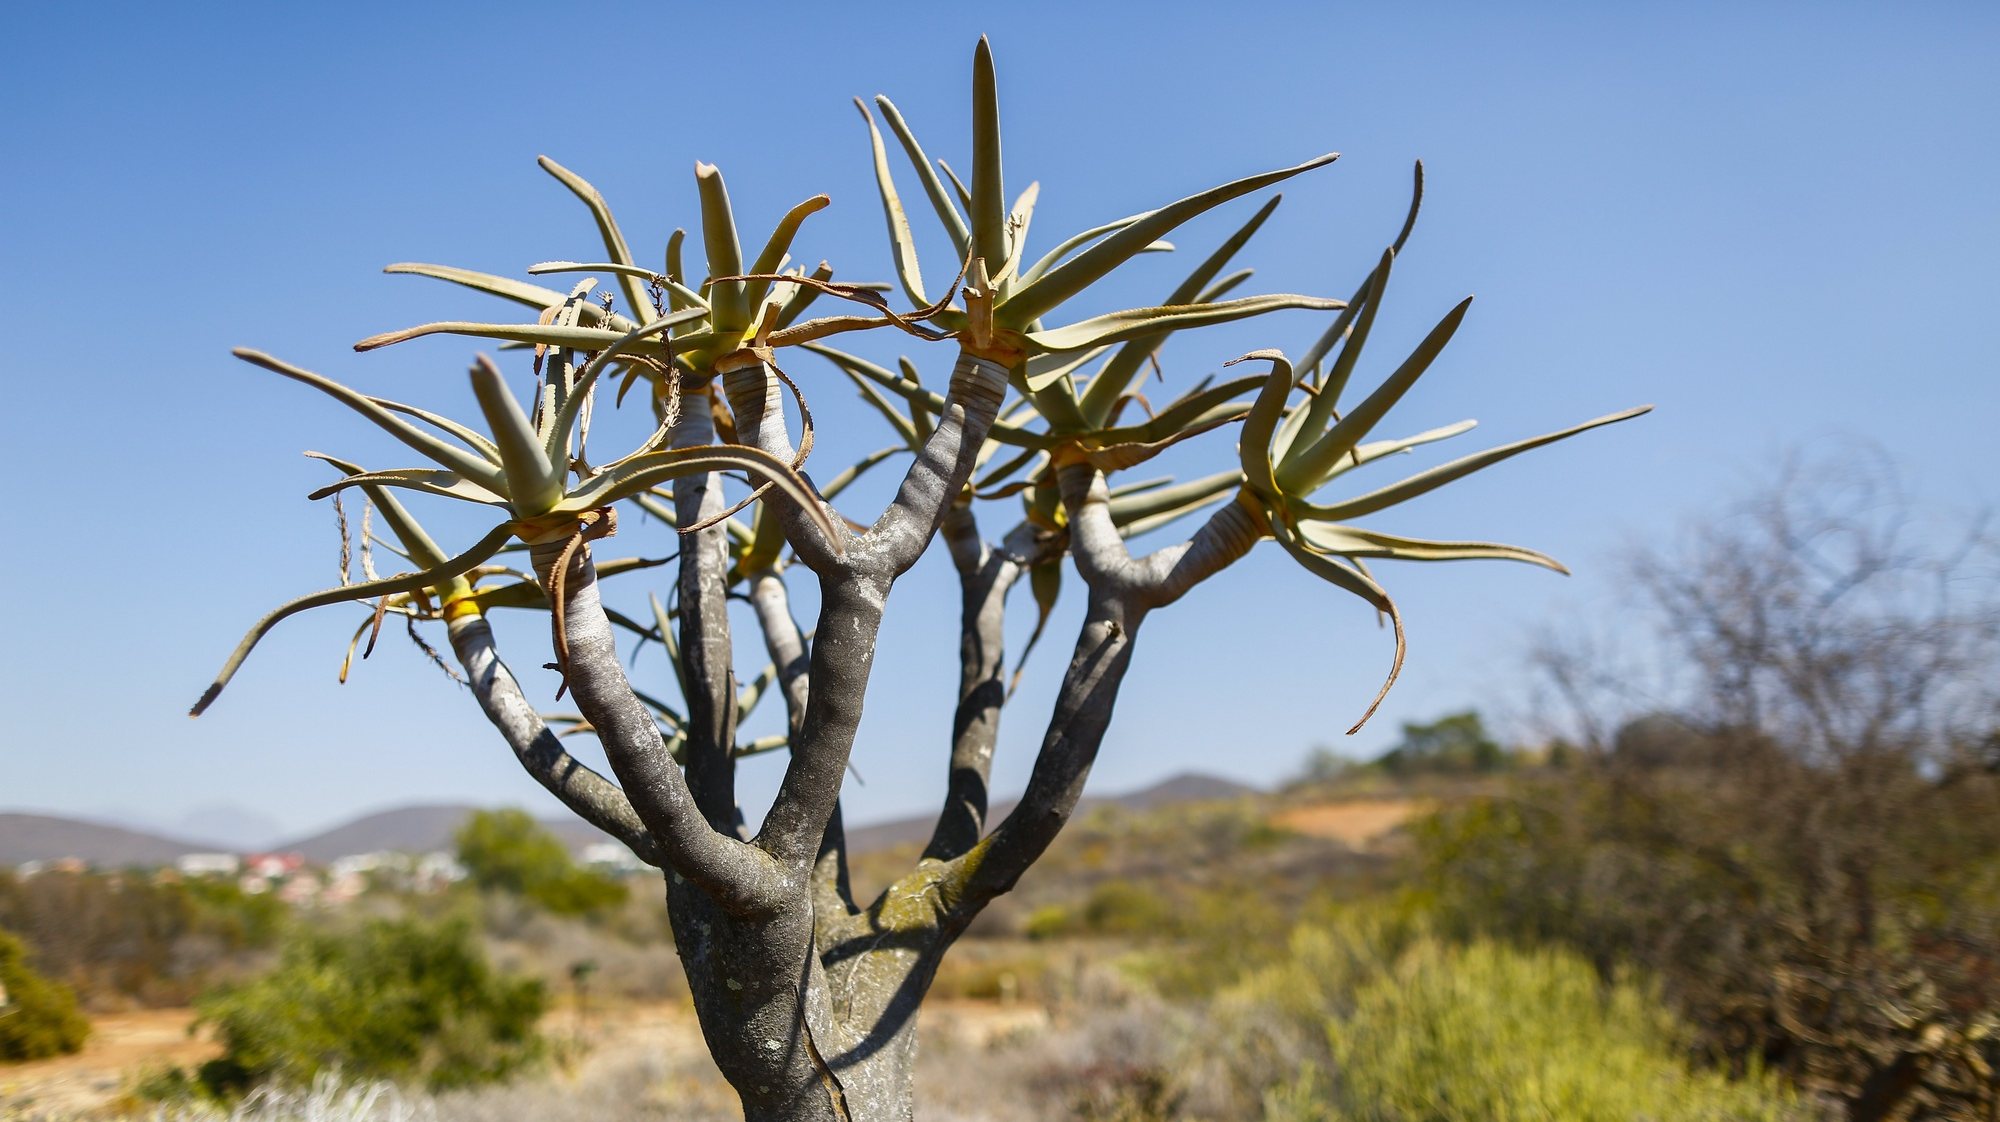 epa05822249 A Quiver Tree Aloe grows in Worcester, South Africa, 01 March 2017. The Western Cape of South Africa is currently in the midst of a severe drought. The Kokerboom or Quiver Tree Aloe is a succulent plant with the ability to store water in its stems and leaves and highly adapted to cope during drought.  EPA/NIC BOTHMA